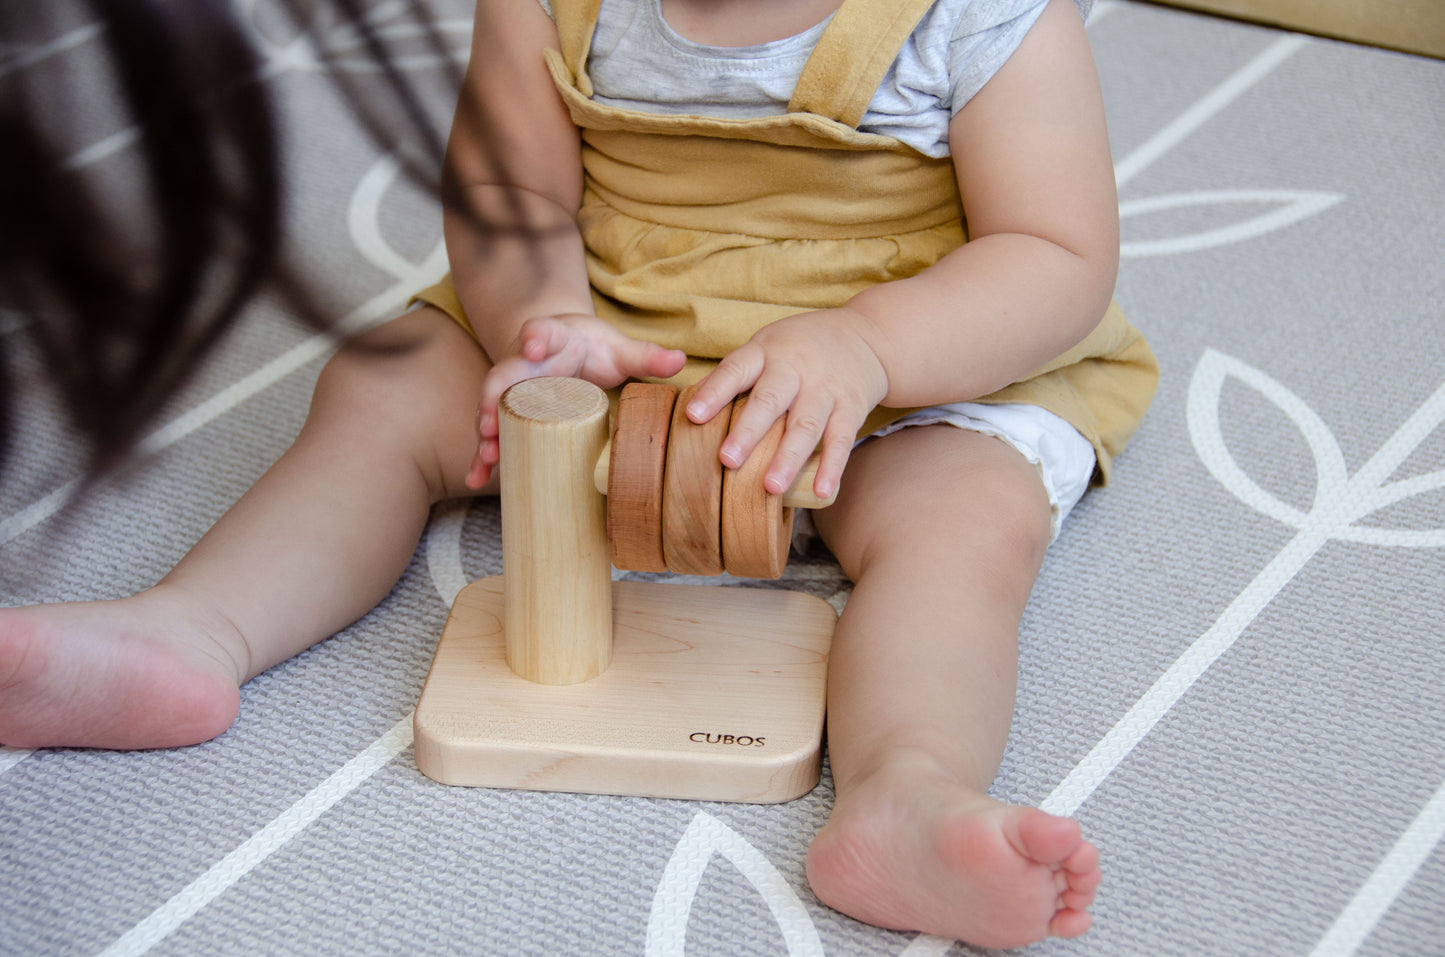 Brilliant baby girl successfully stacking all three wooden rings on the Cubos Horizontal Dowel Rings Stacker, showcasing her achievement and developing her problem-solving skills with each successful placement.